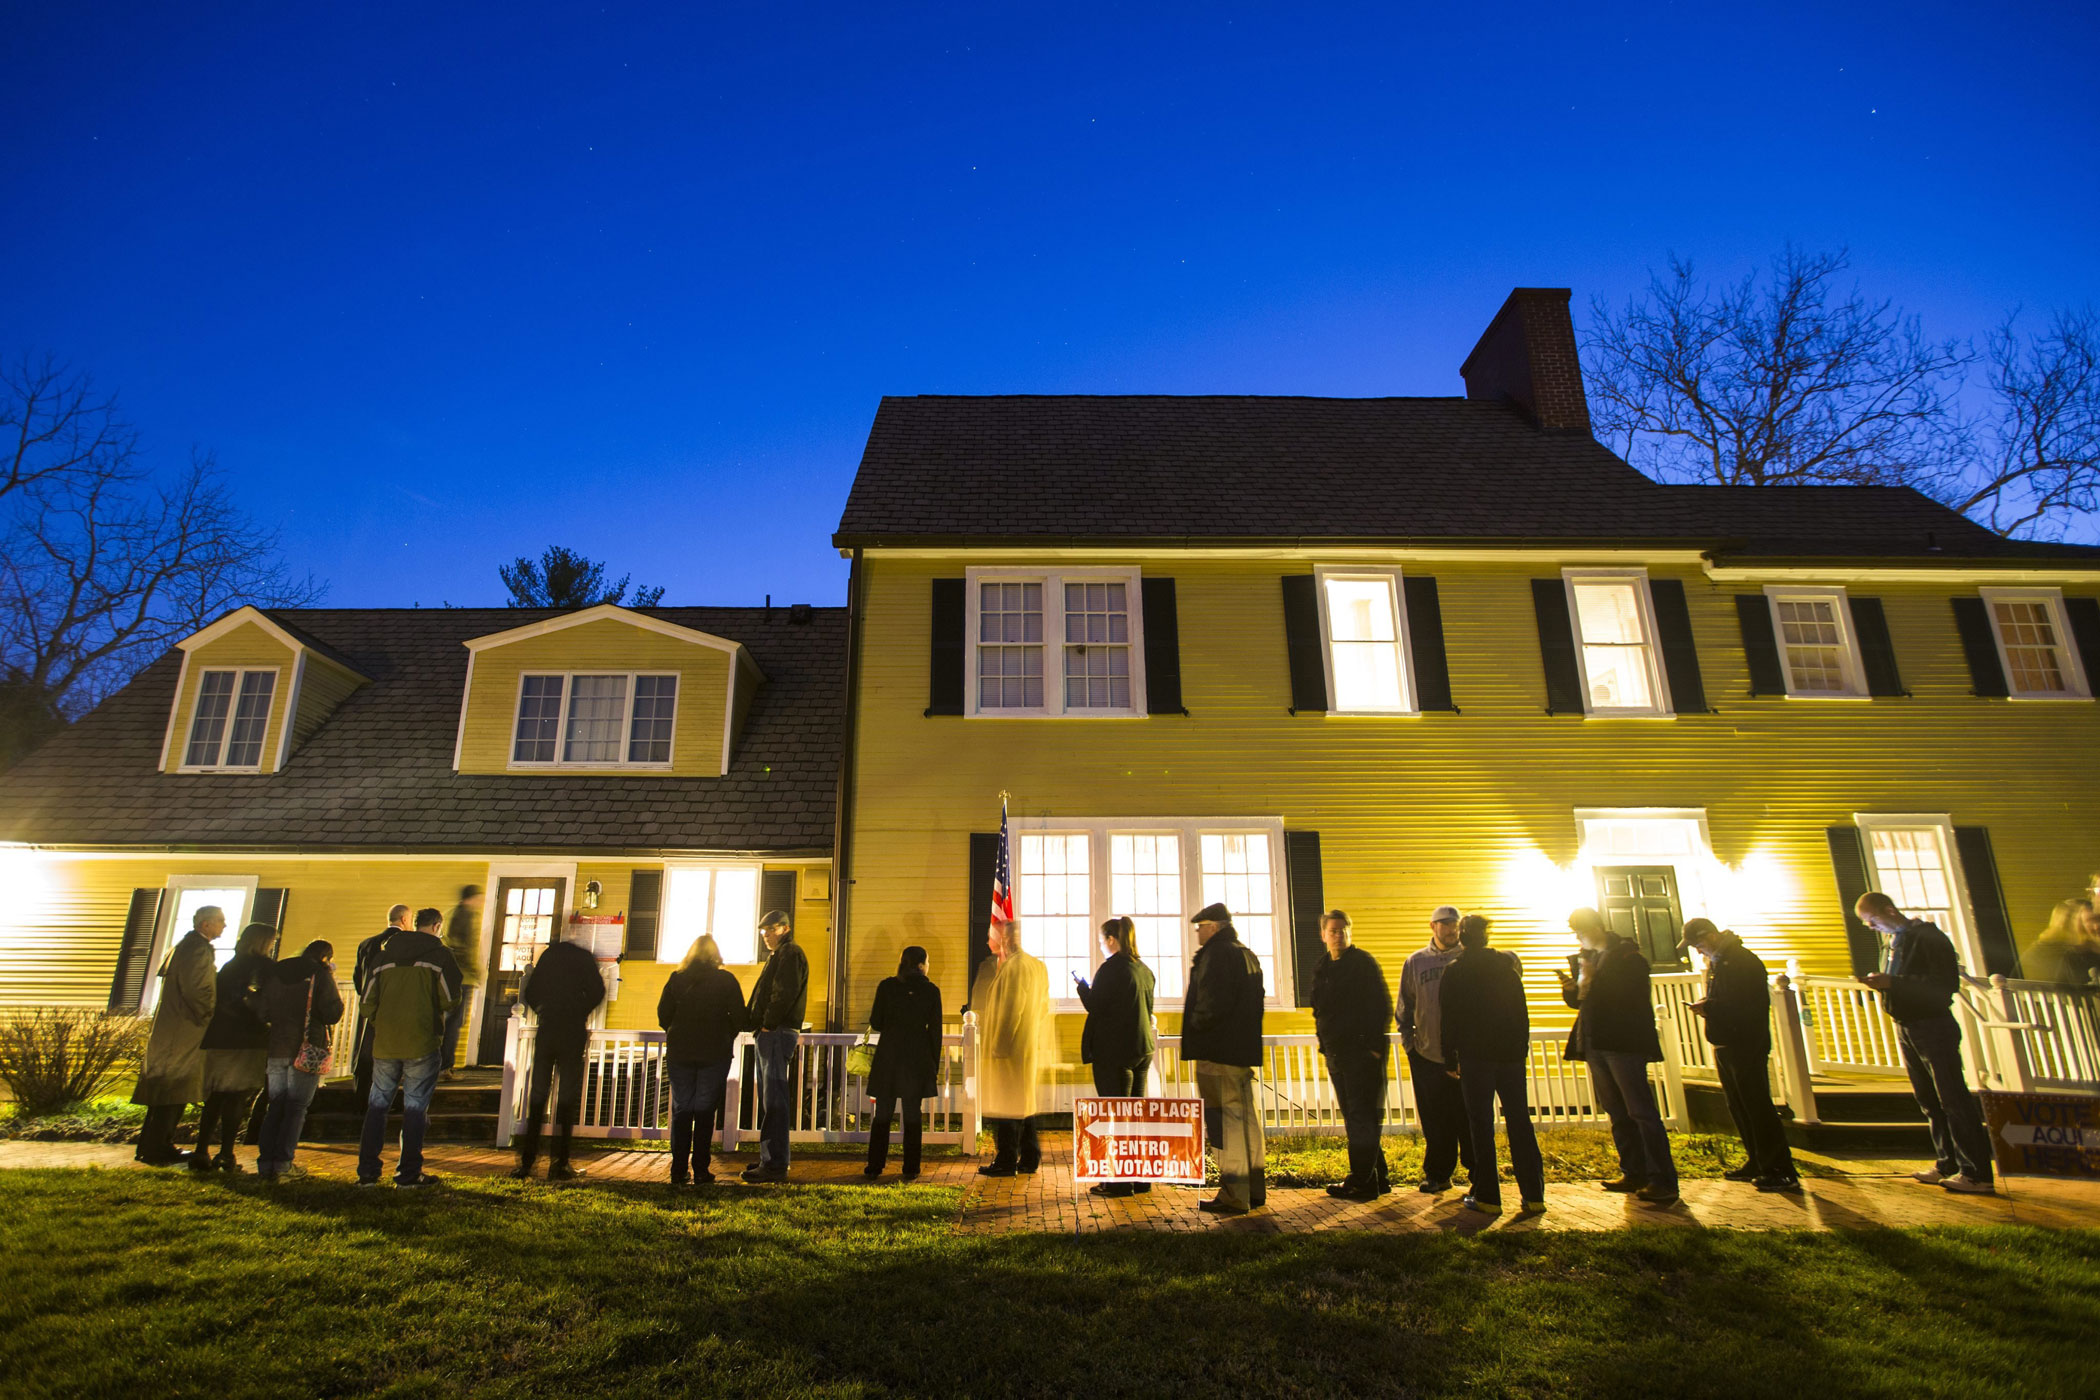 Virginia residents wait in line in the pre-dawn hours to vote in the Virginia primary at a historic property called the Hunter House at Nottoway Park in Vienna, Va.